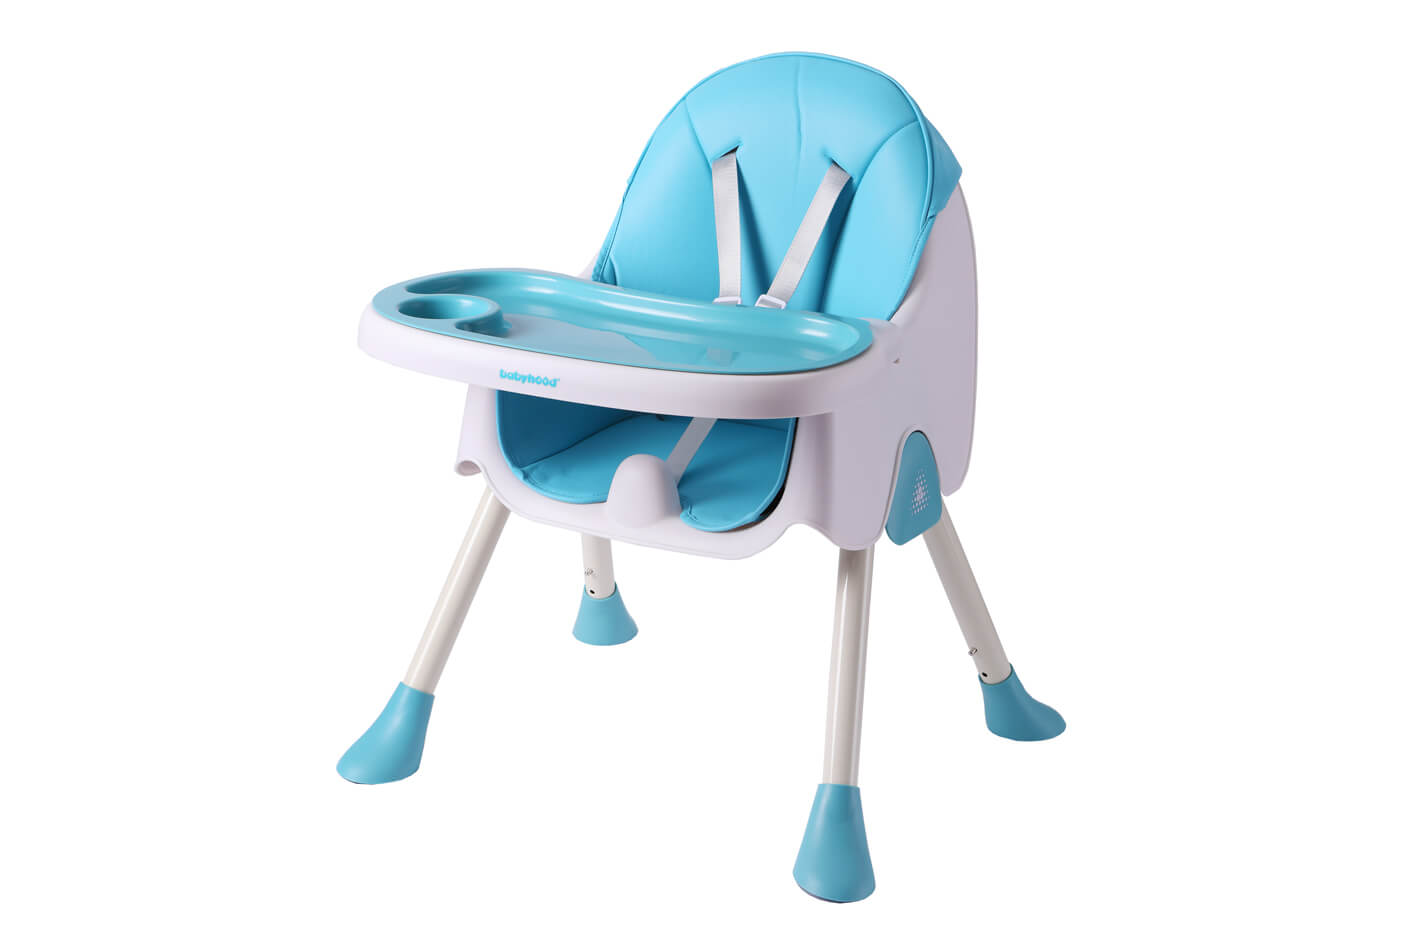 Advantages of Babyhood's Baby High Chair